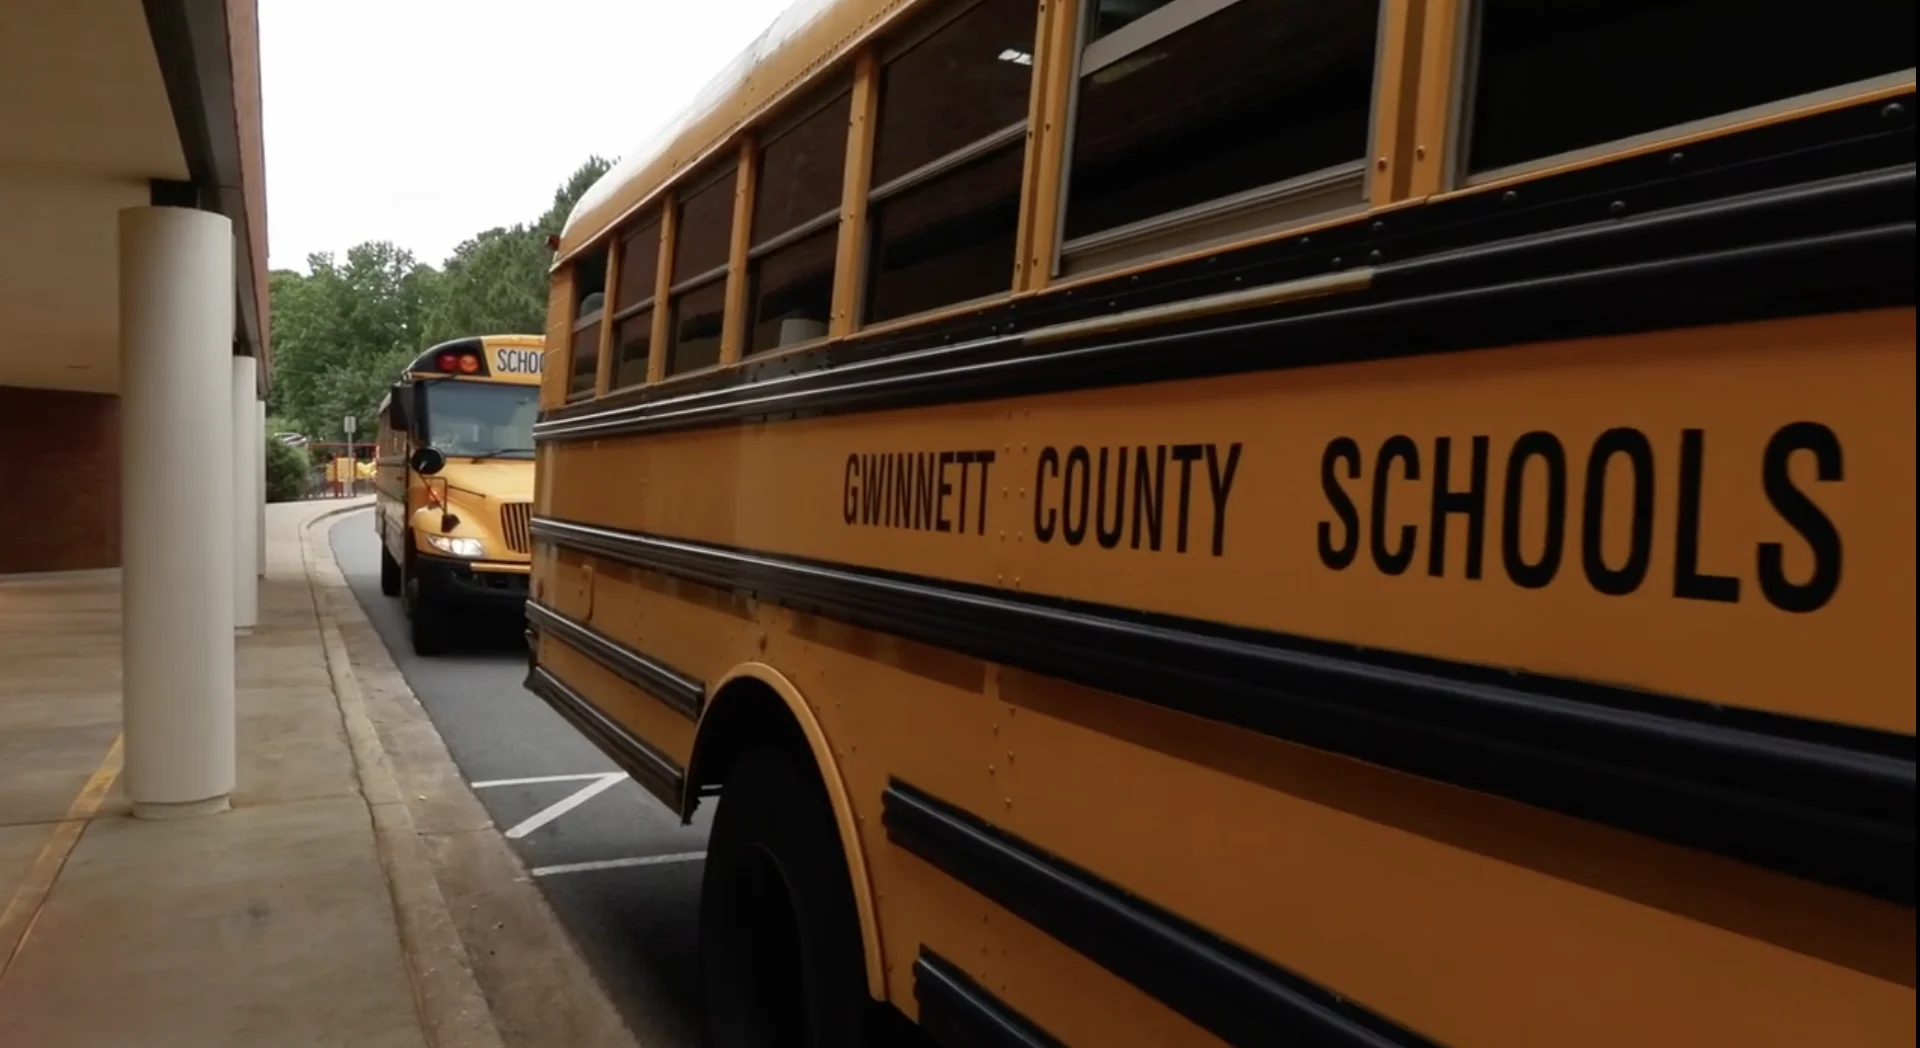 Gwinnett County Public Schools decreases incident investigation time by 50% with AI Dash Cams